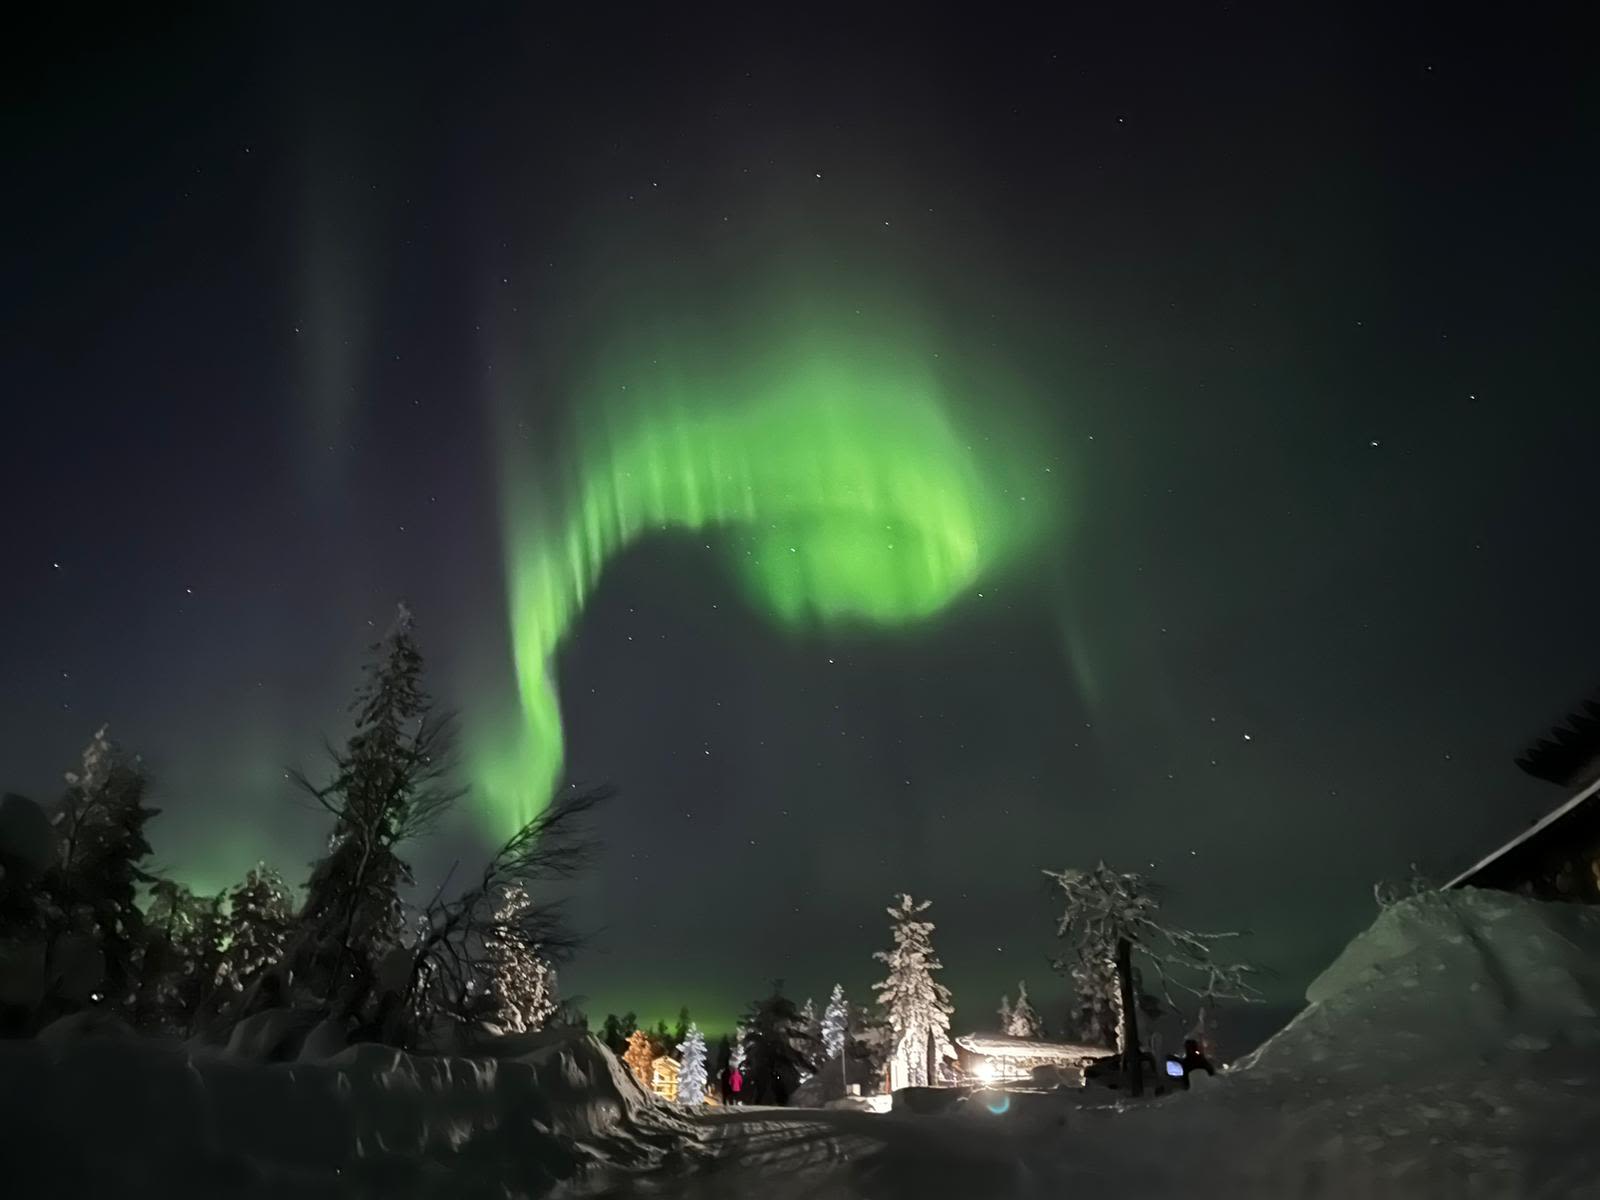 Richard Branson's photo of the Northern Lights in Finland on the 2023 Strive Challenge